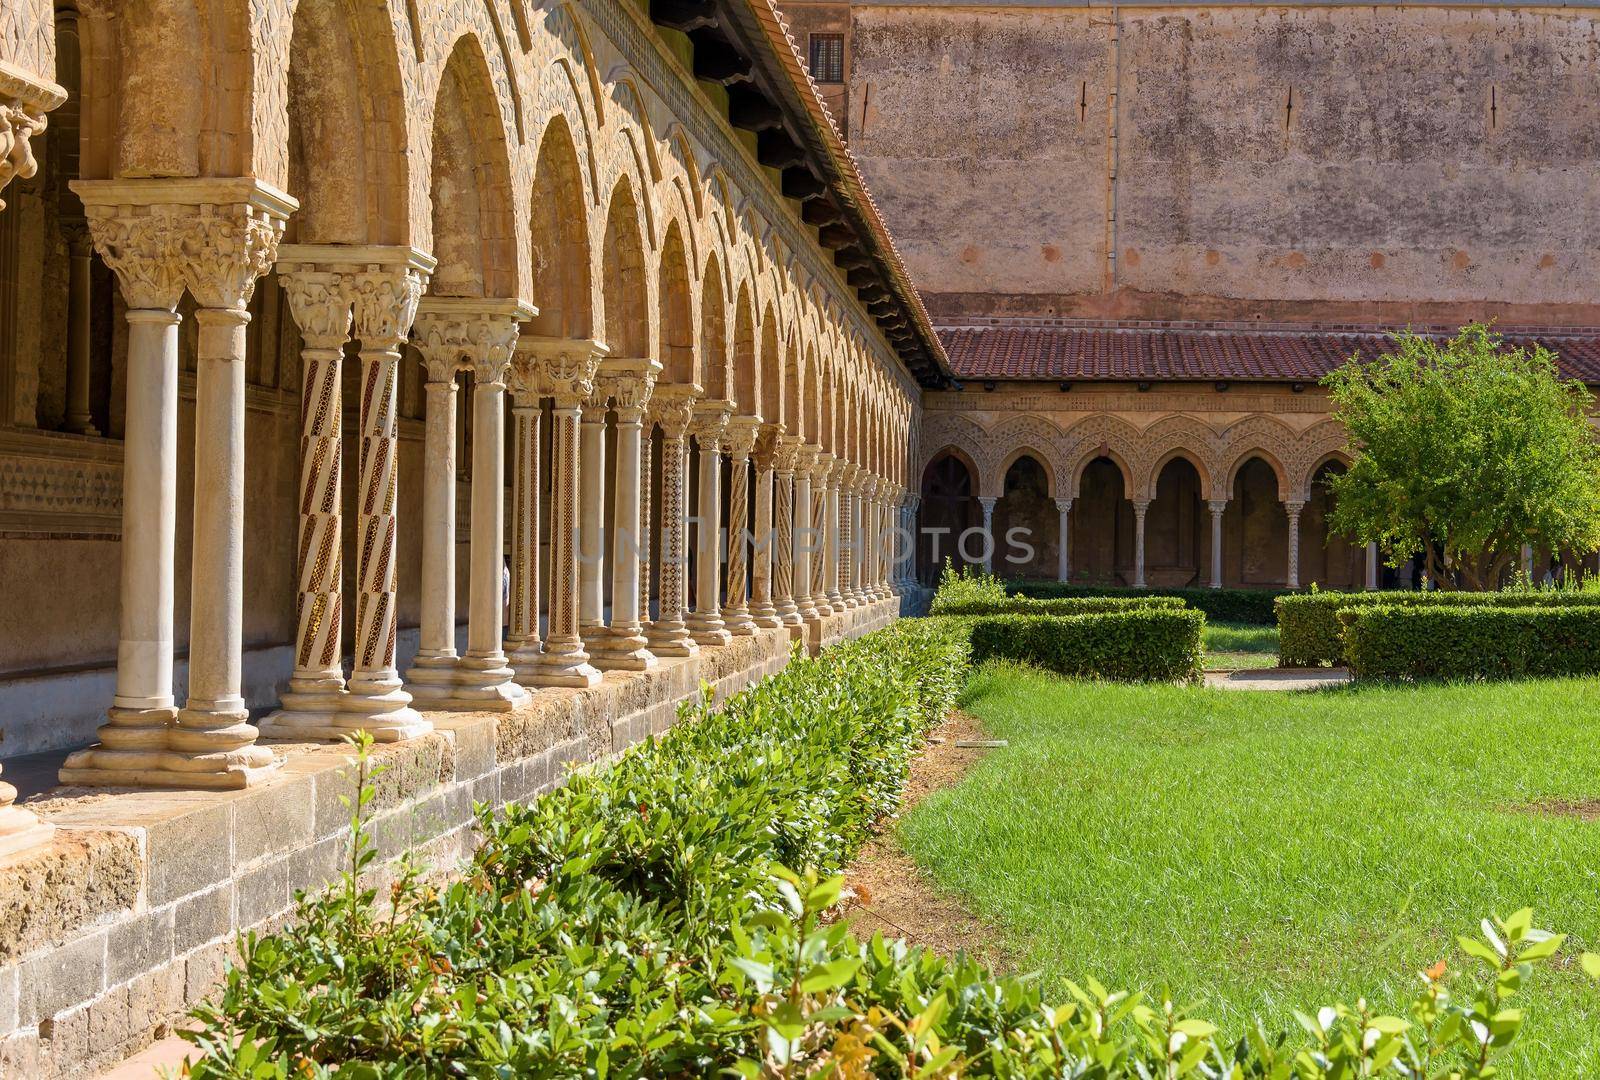 Decorated columns in cloister at the Monreale Abbey, Palermo, Italy